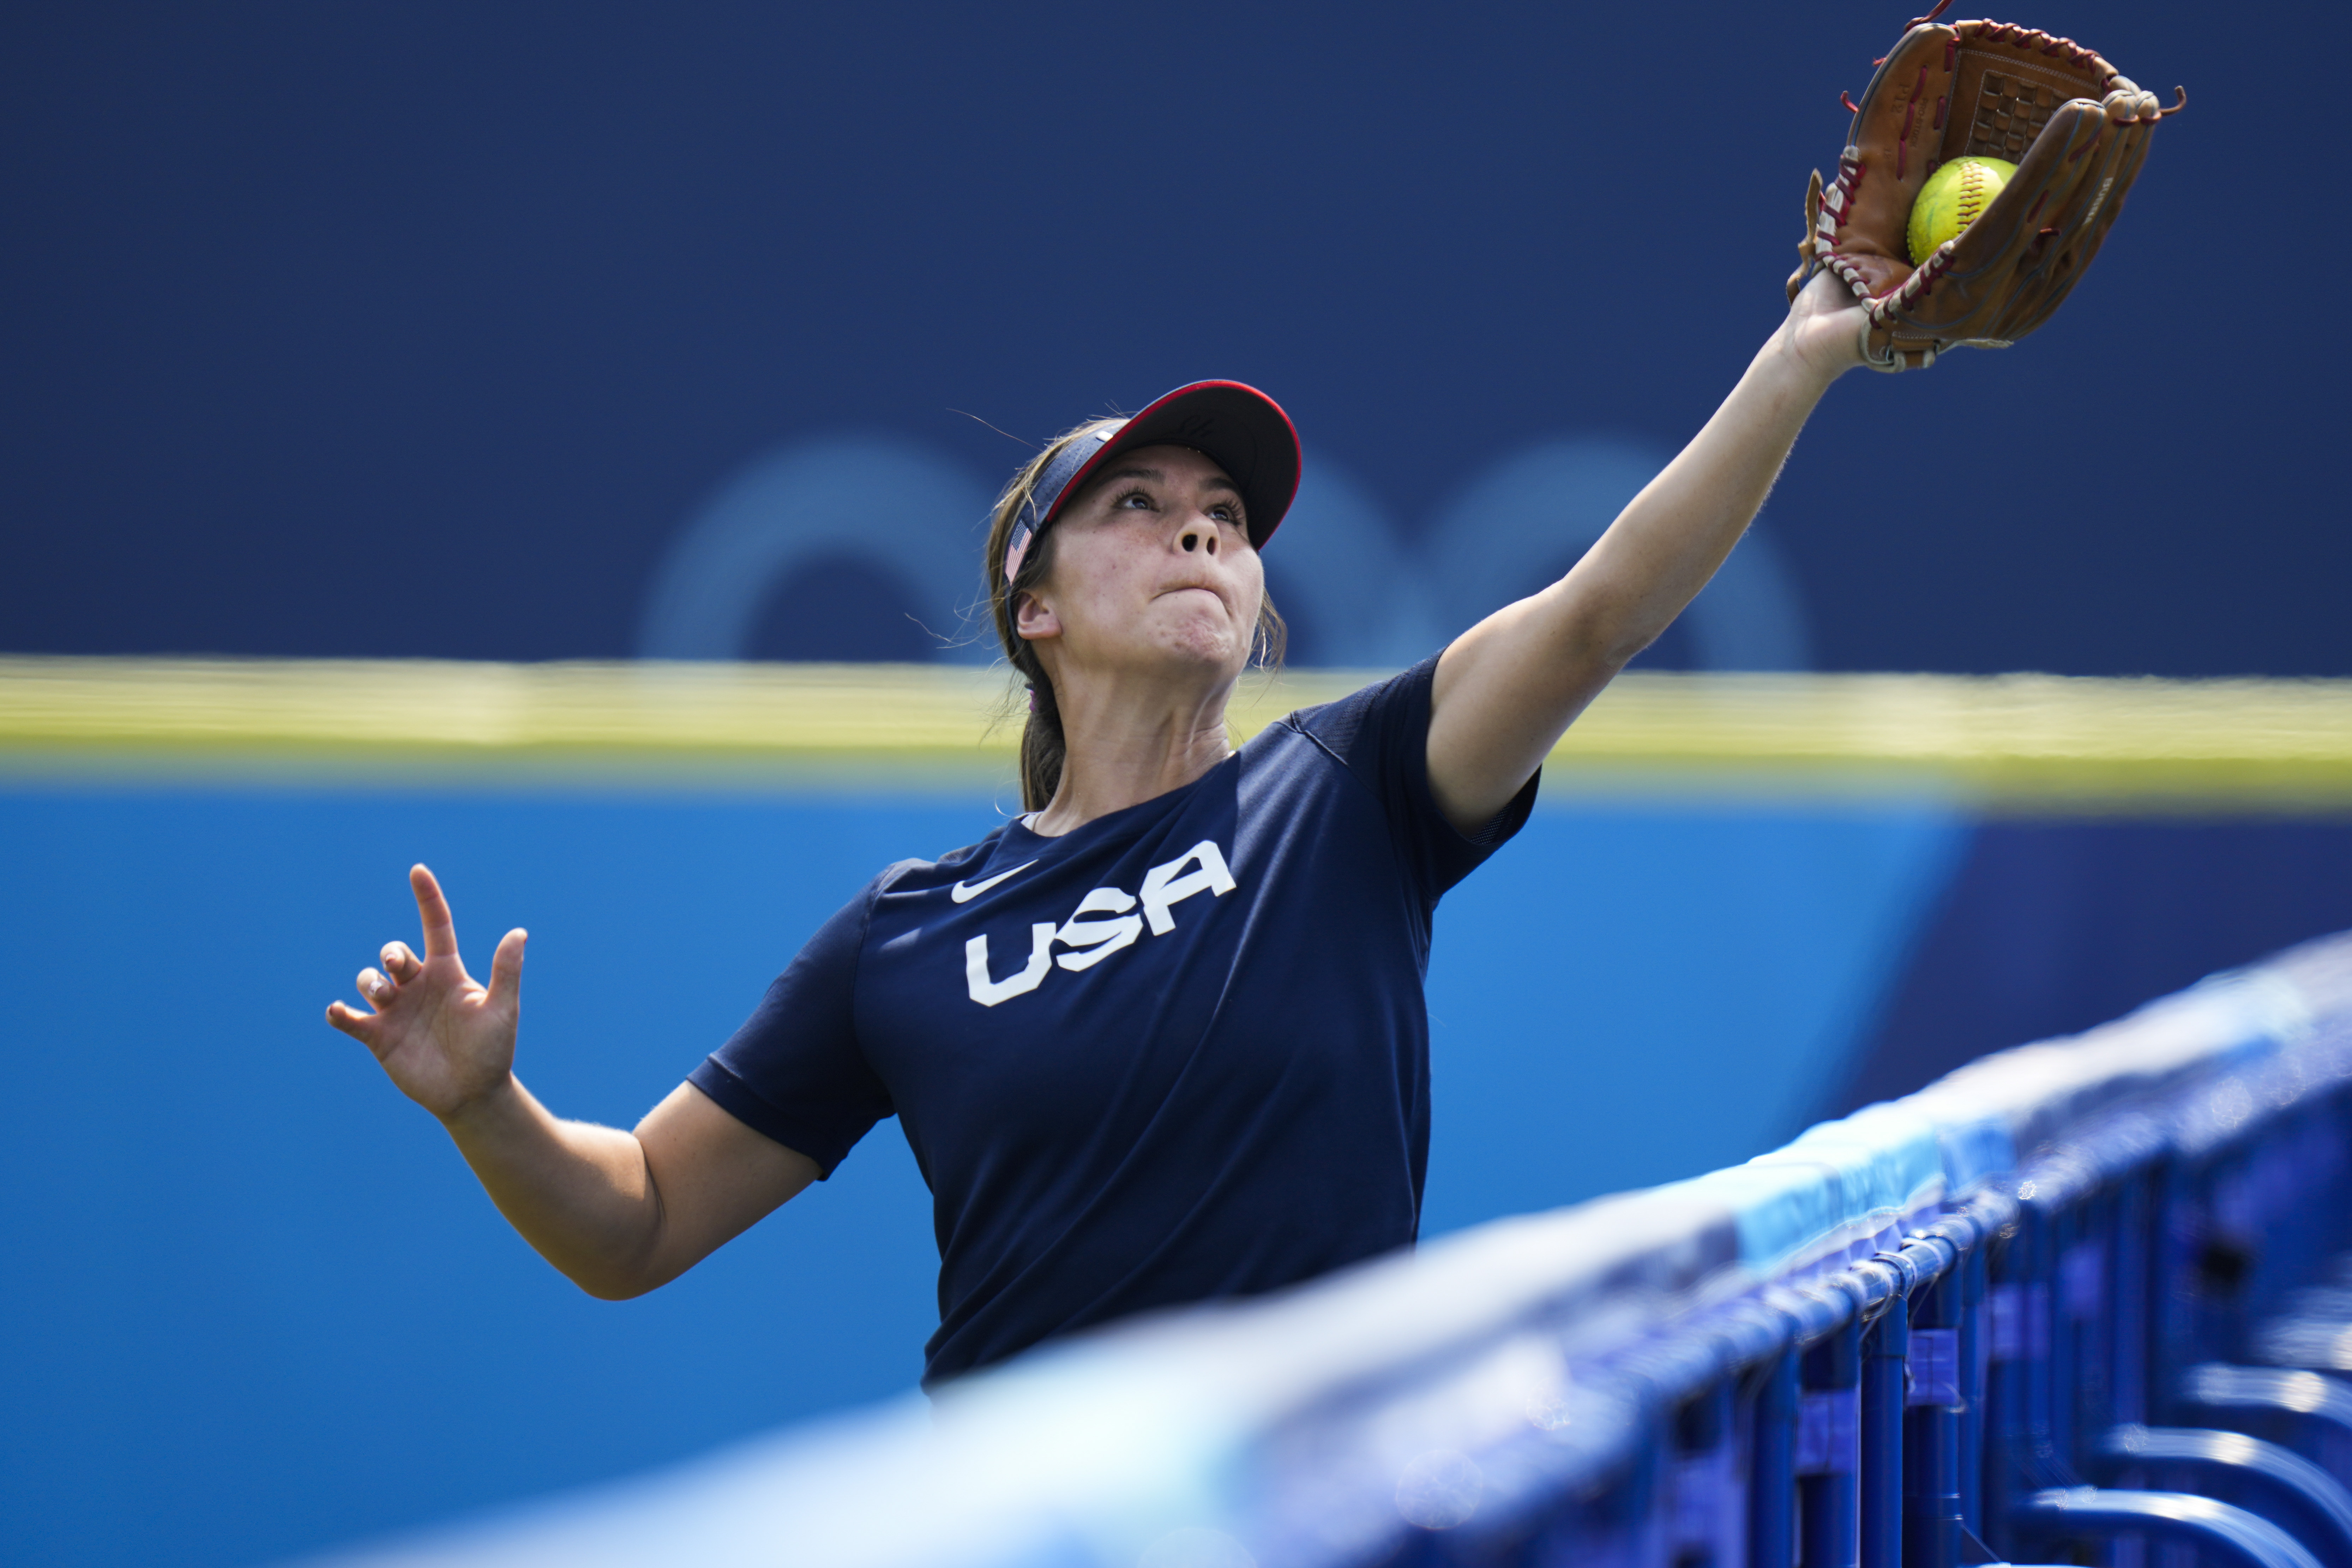 Softball Is Back At 21 Olympics Here S How To Watch Free Live Stream Tv Schedule For Team Usa And More Masslive Com